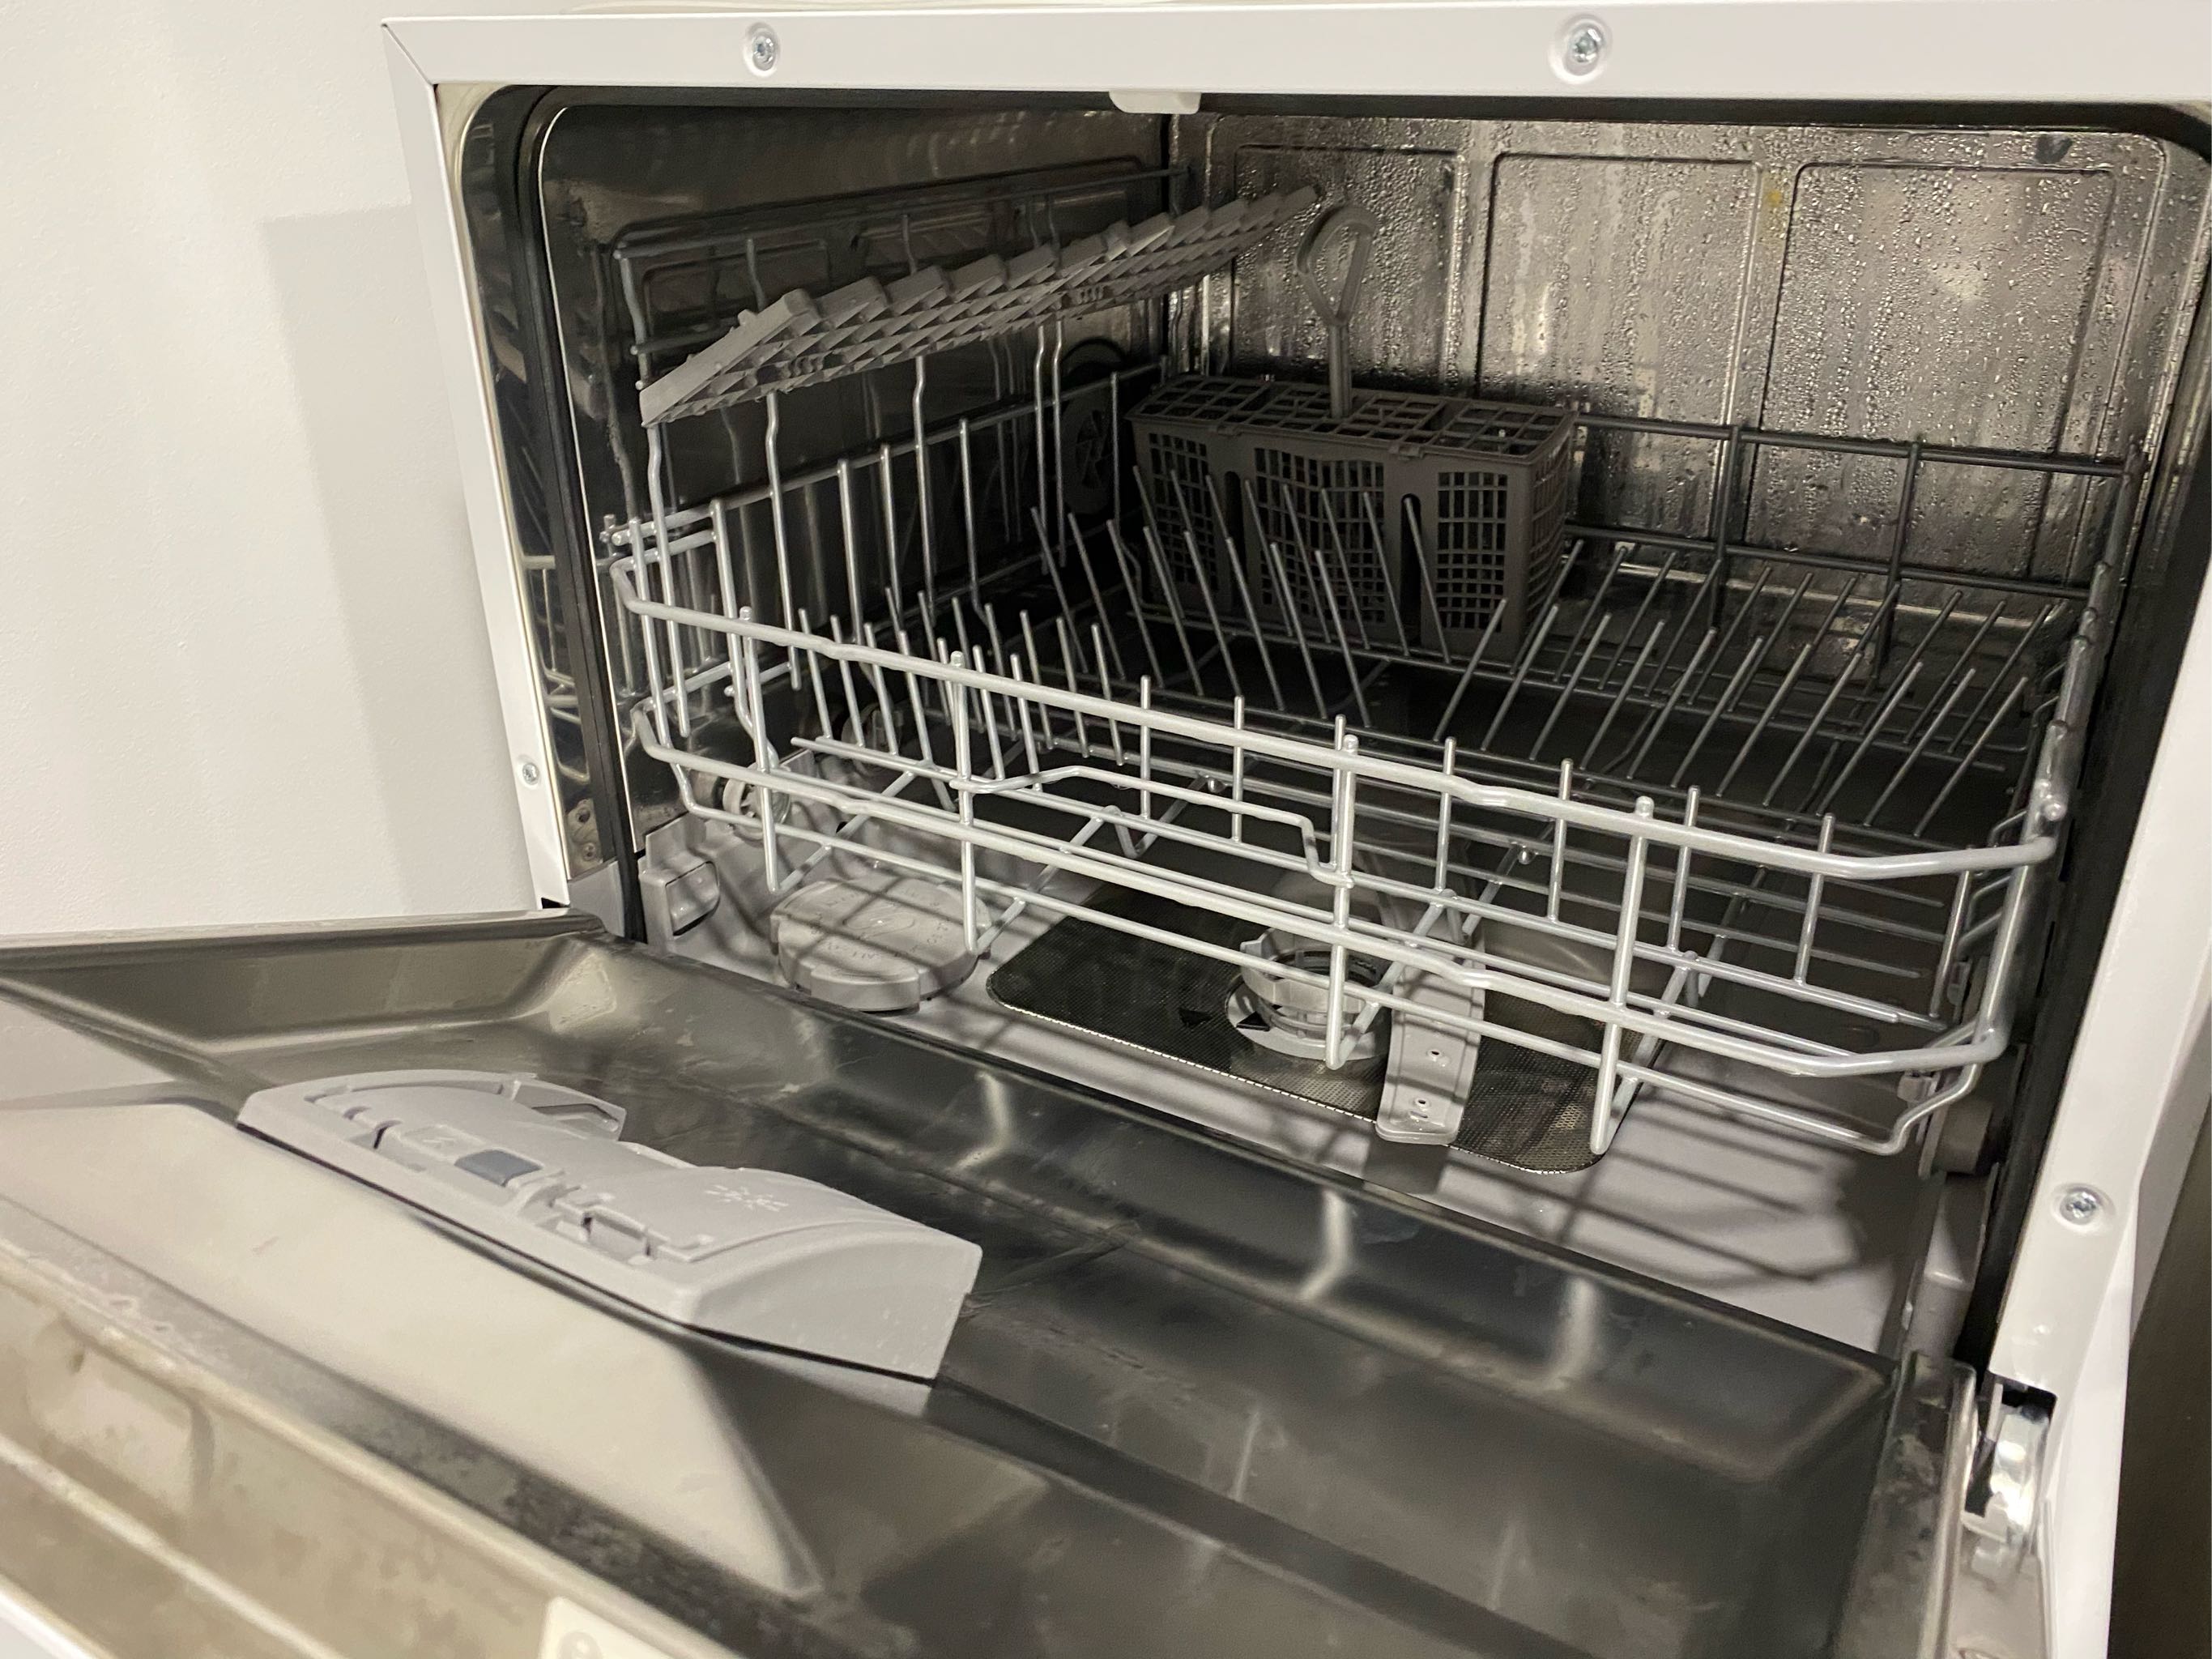 Countertop Dishwasher Review-How to Use a Countertop Dishwasher 